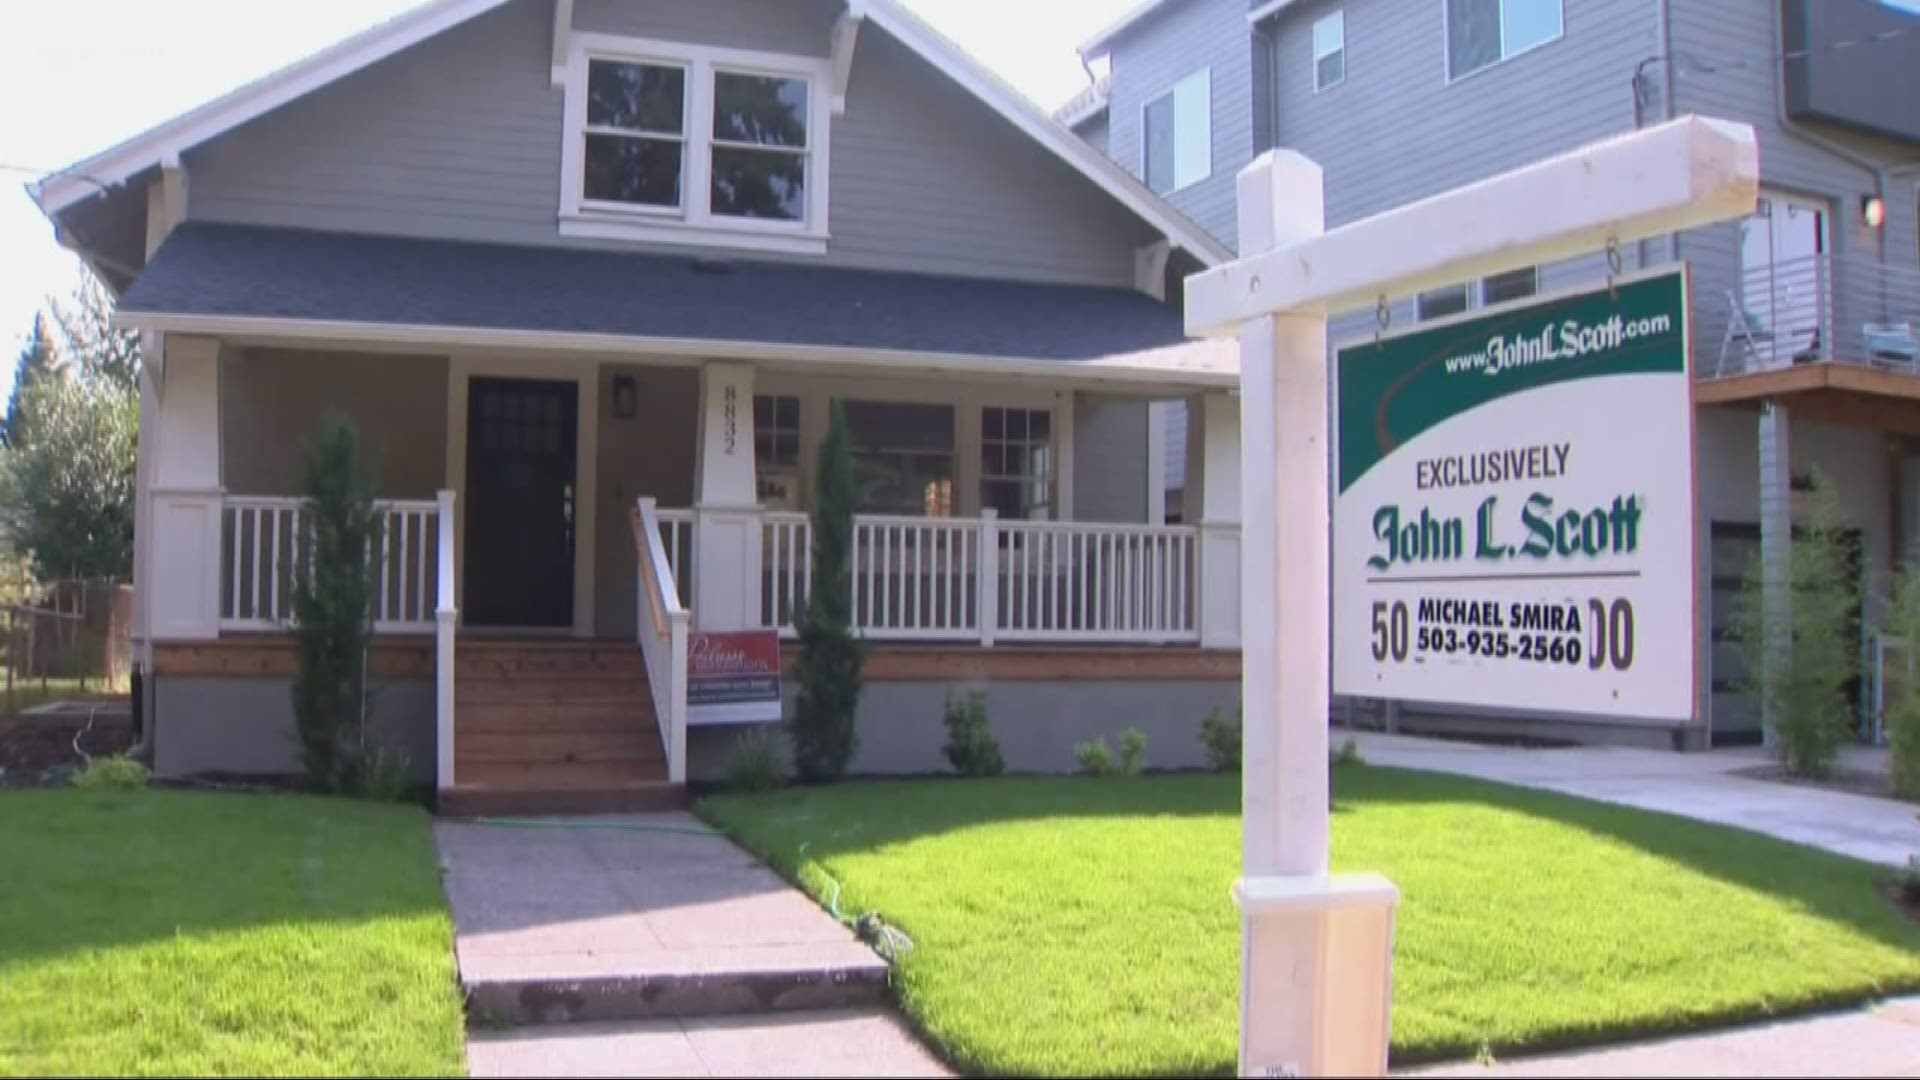 Portland area hope prices have dipped, but they are still significantly higher than in 2015.